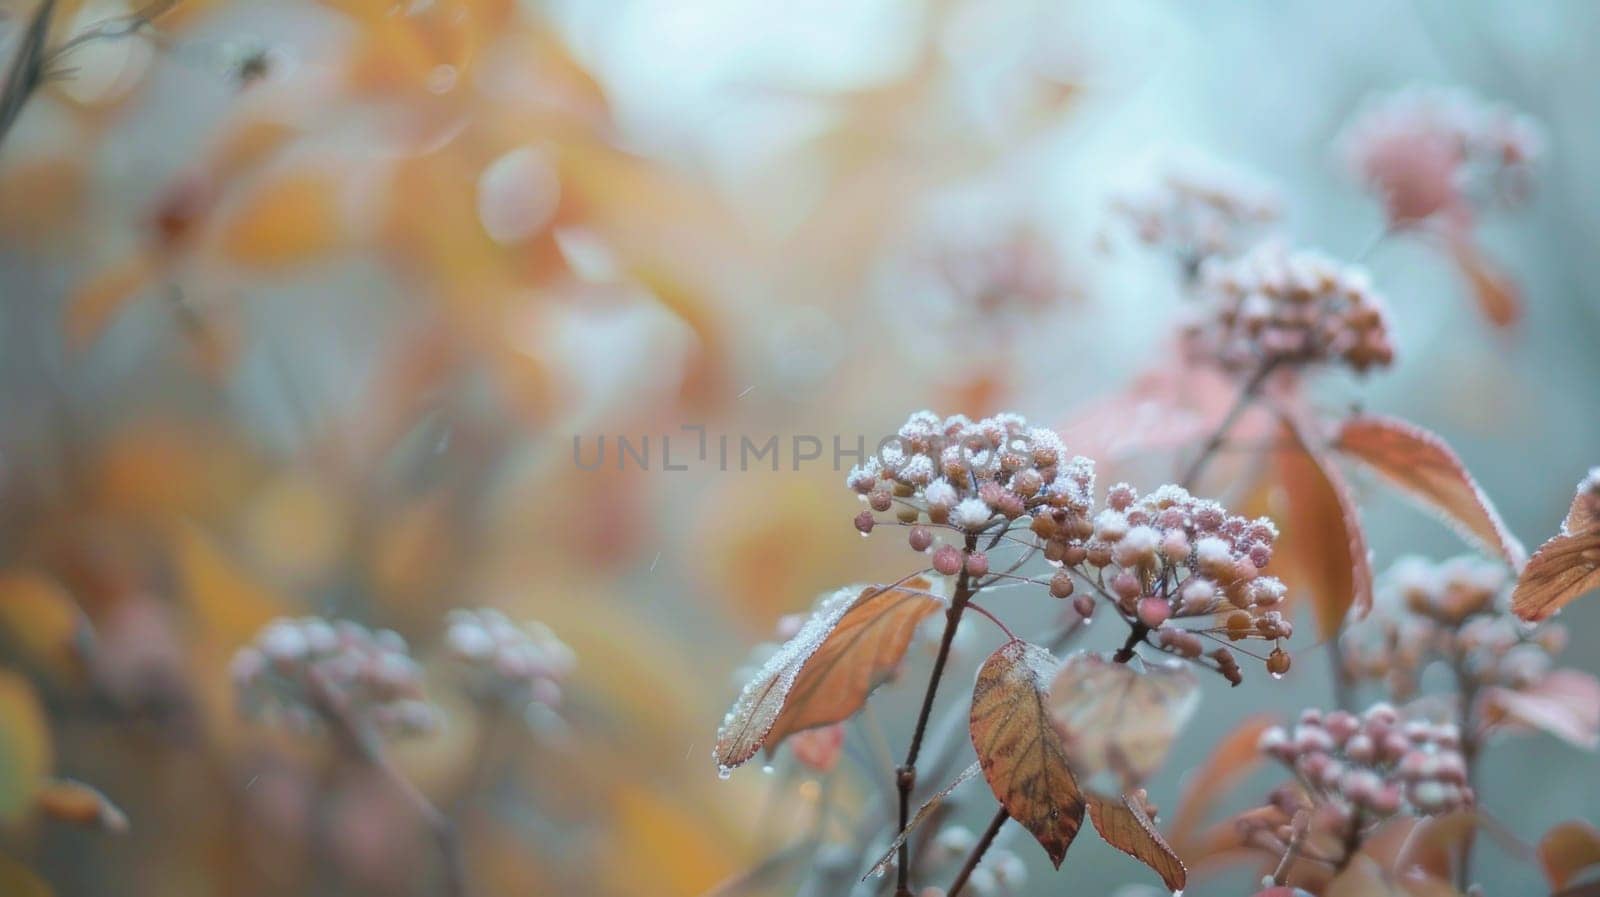 The Nature of Muted colors tone by golfmerrymaker